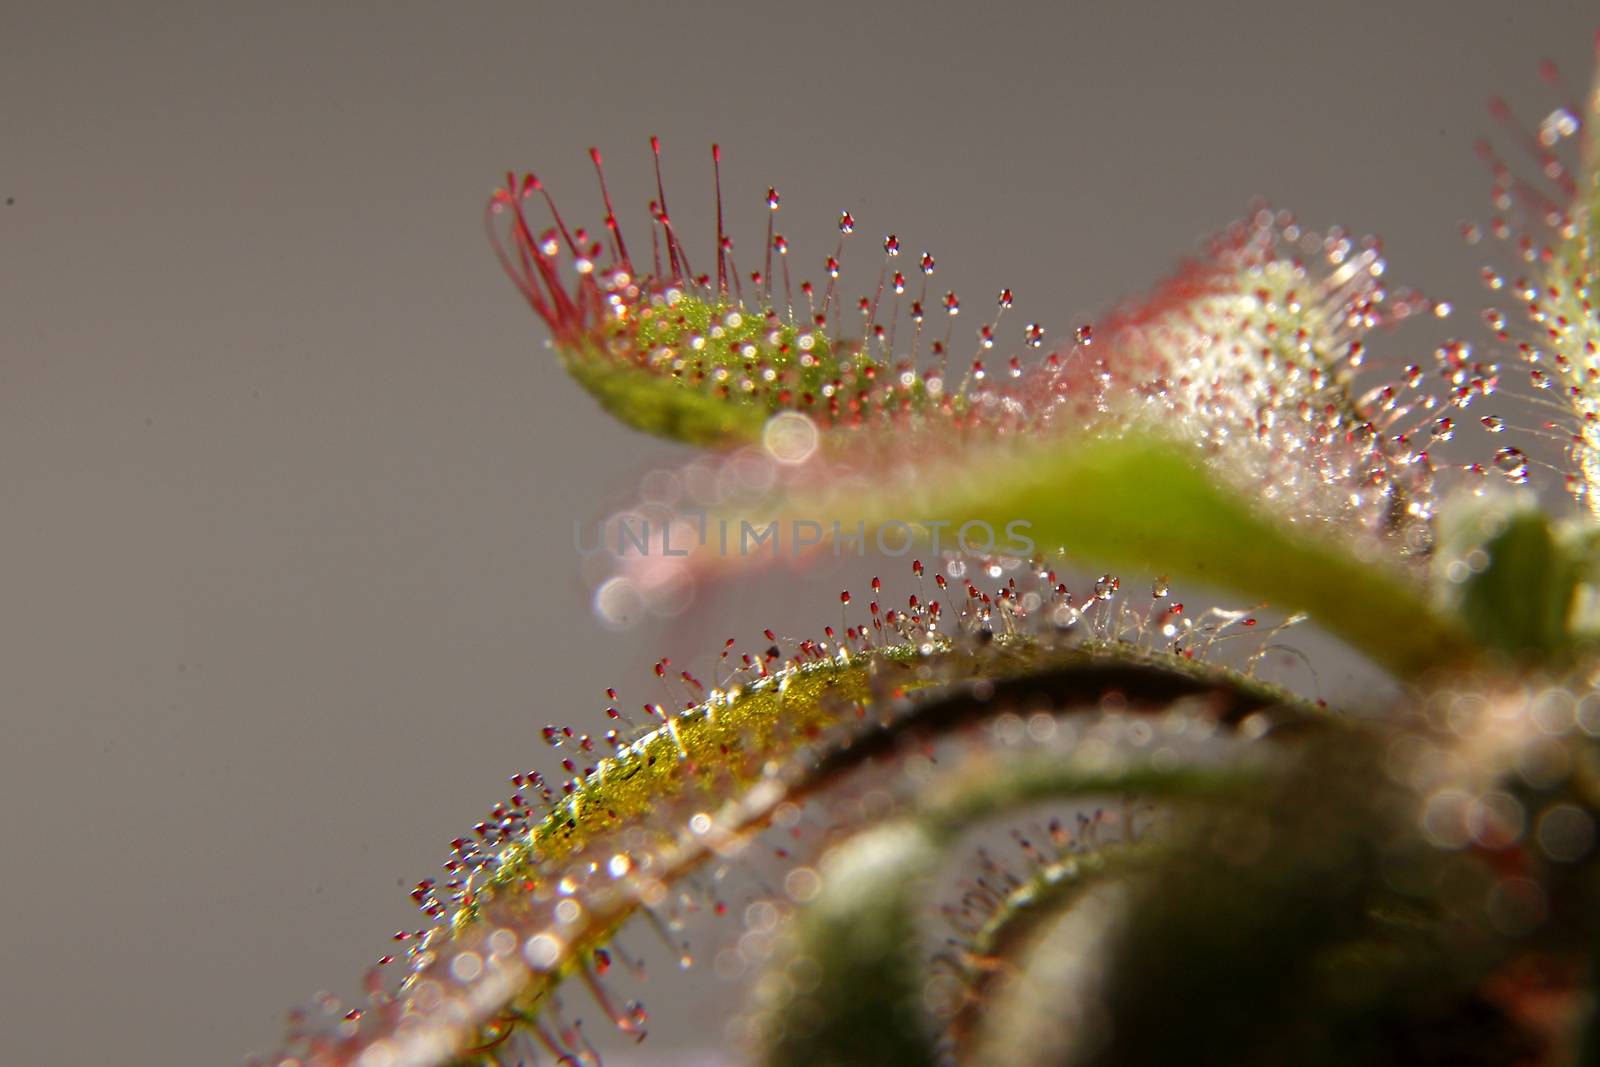 Drosera capensis, sundew plant on background by sveter